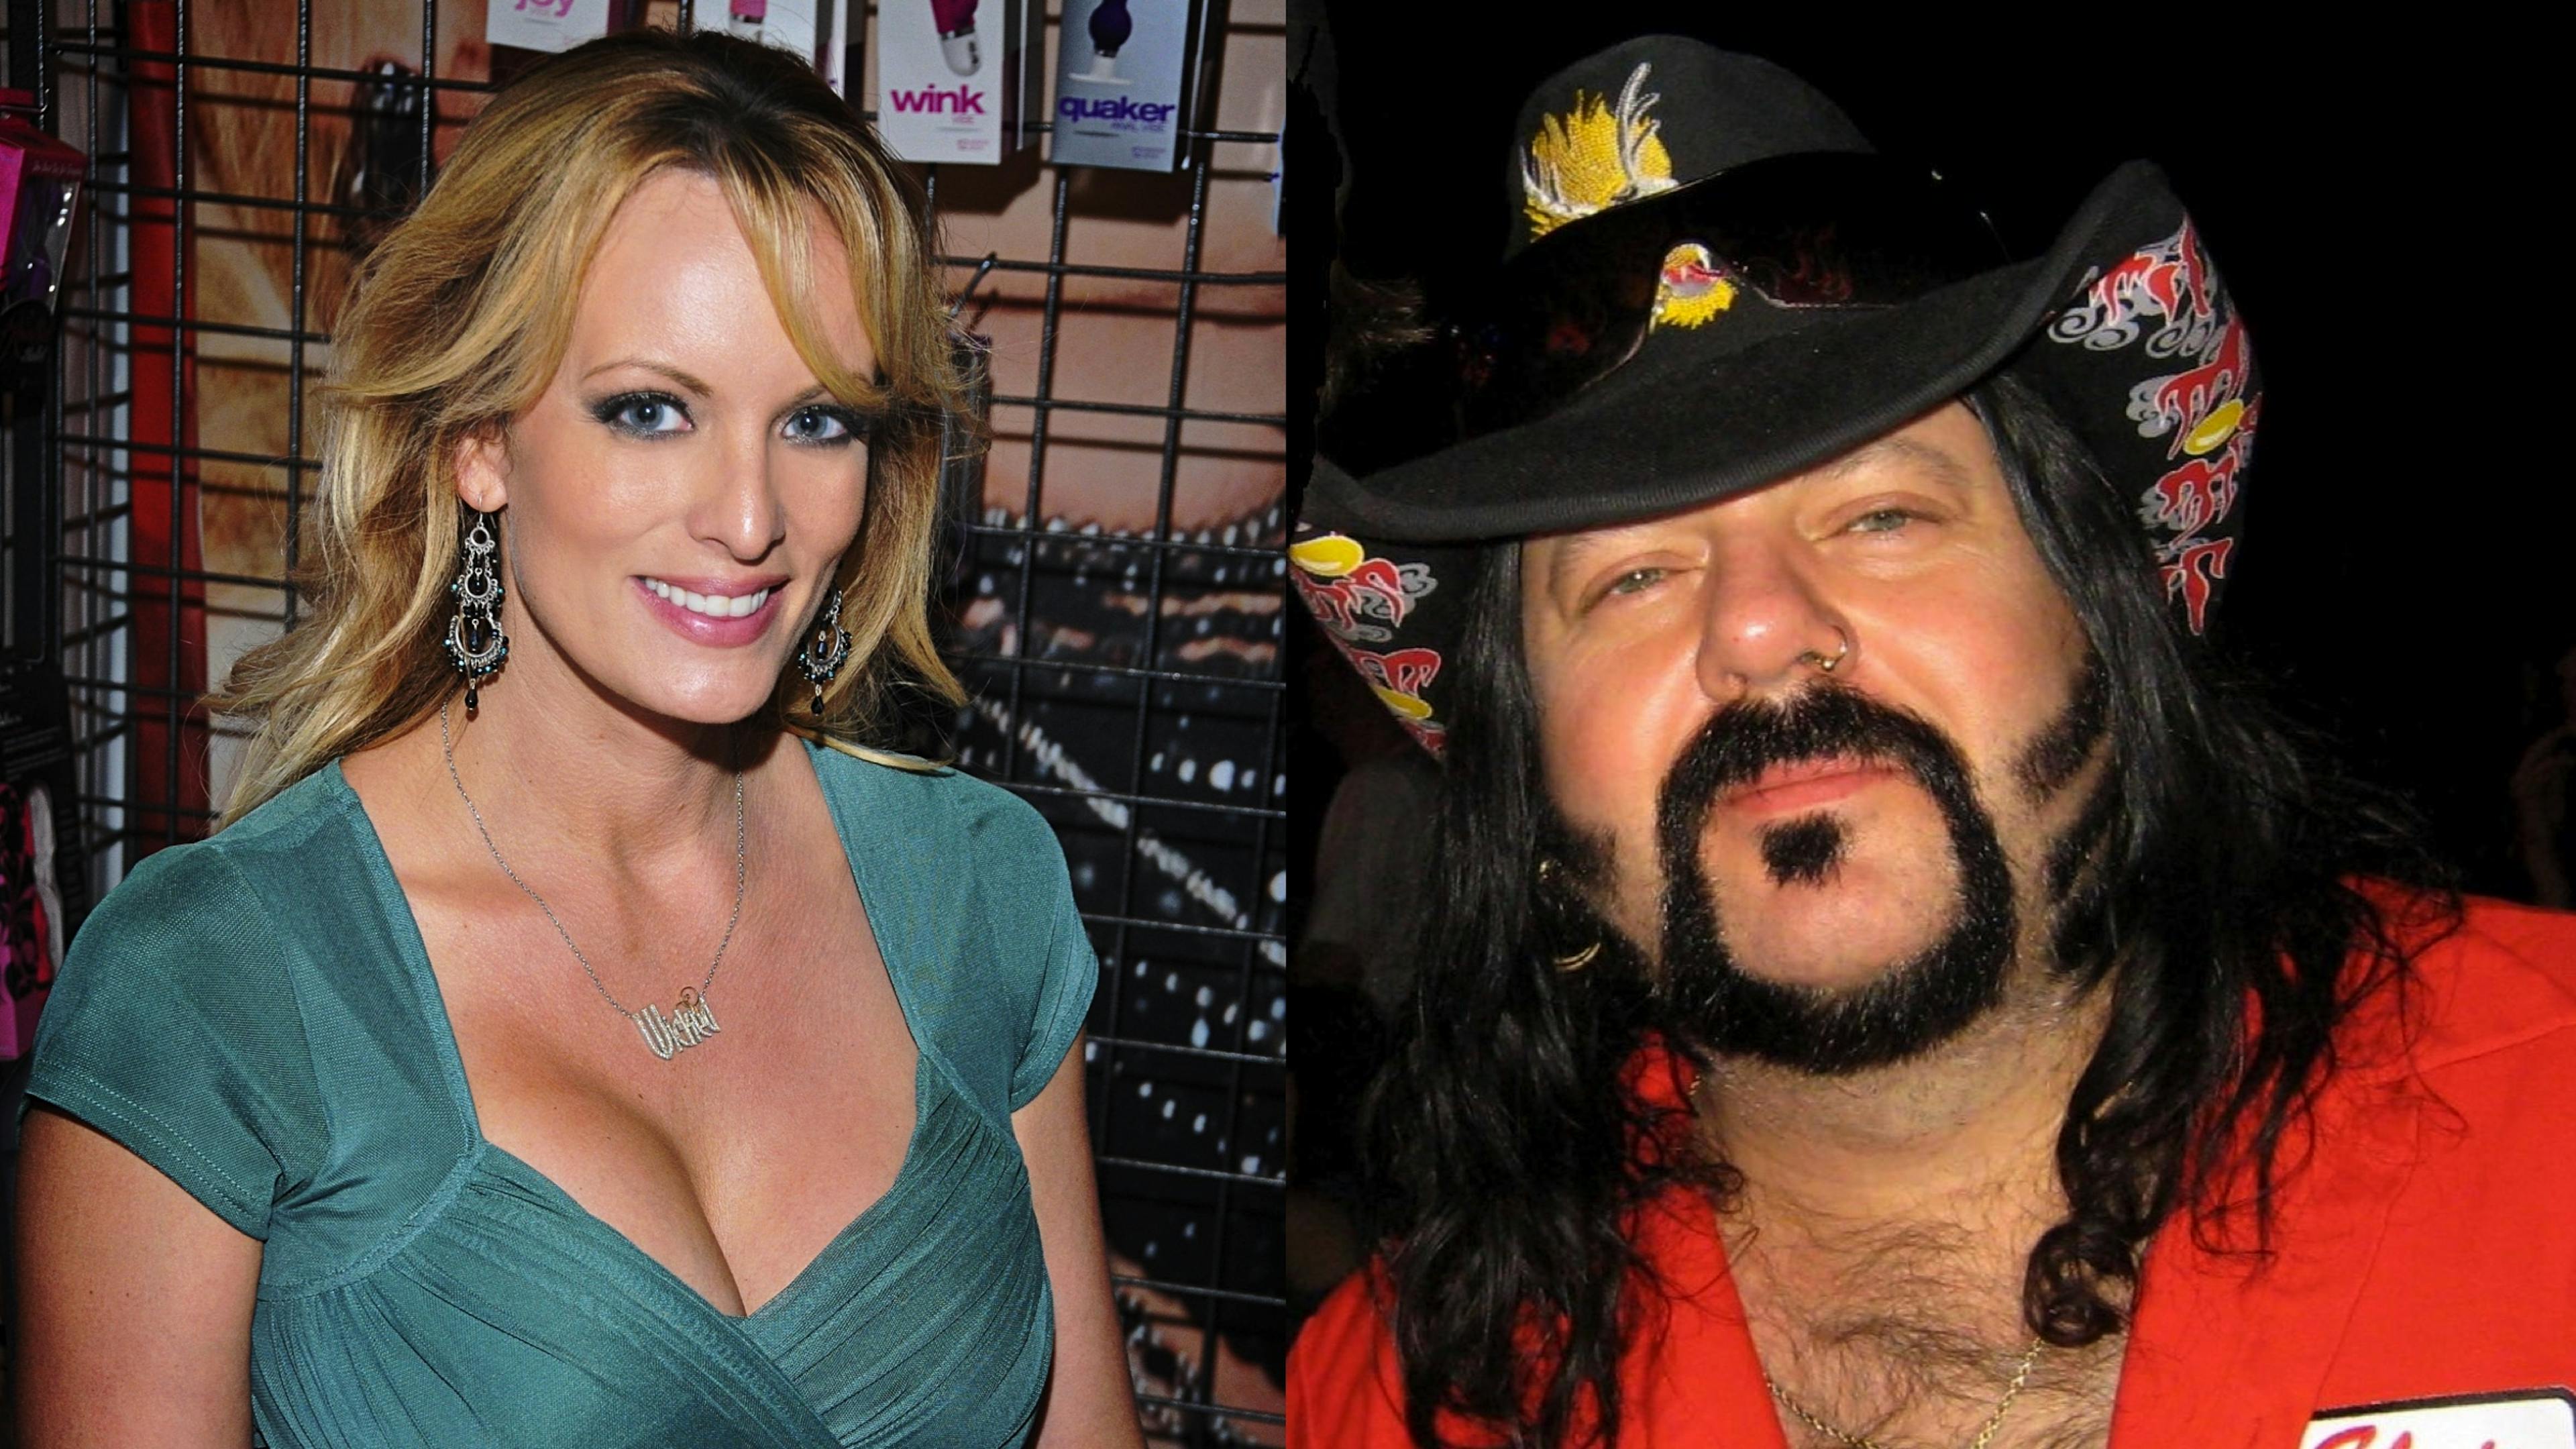 Porn Star Stormy Daniels Talks About Her Friendship With Pantera And Her First Metallica Show In New Interview